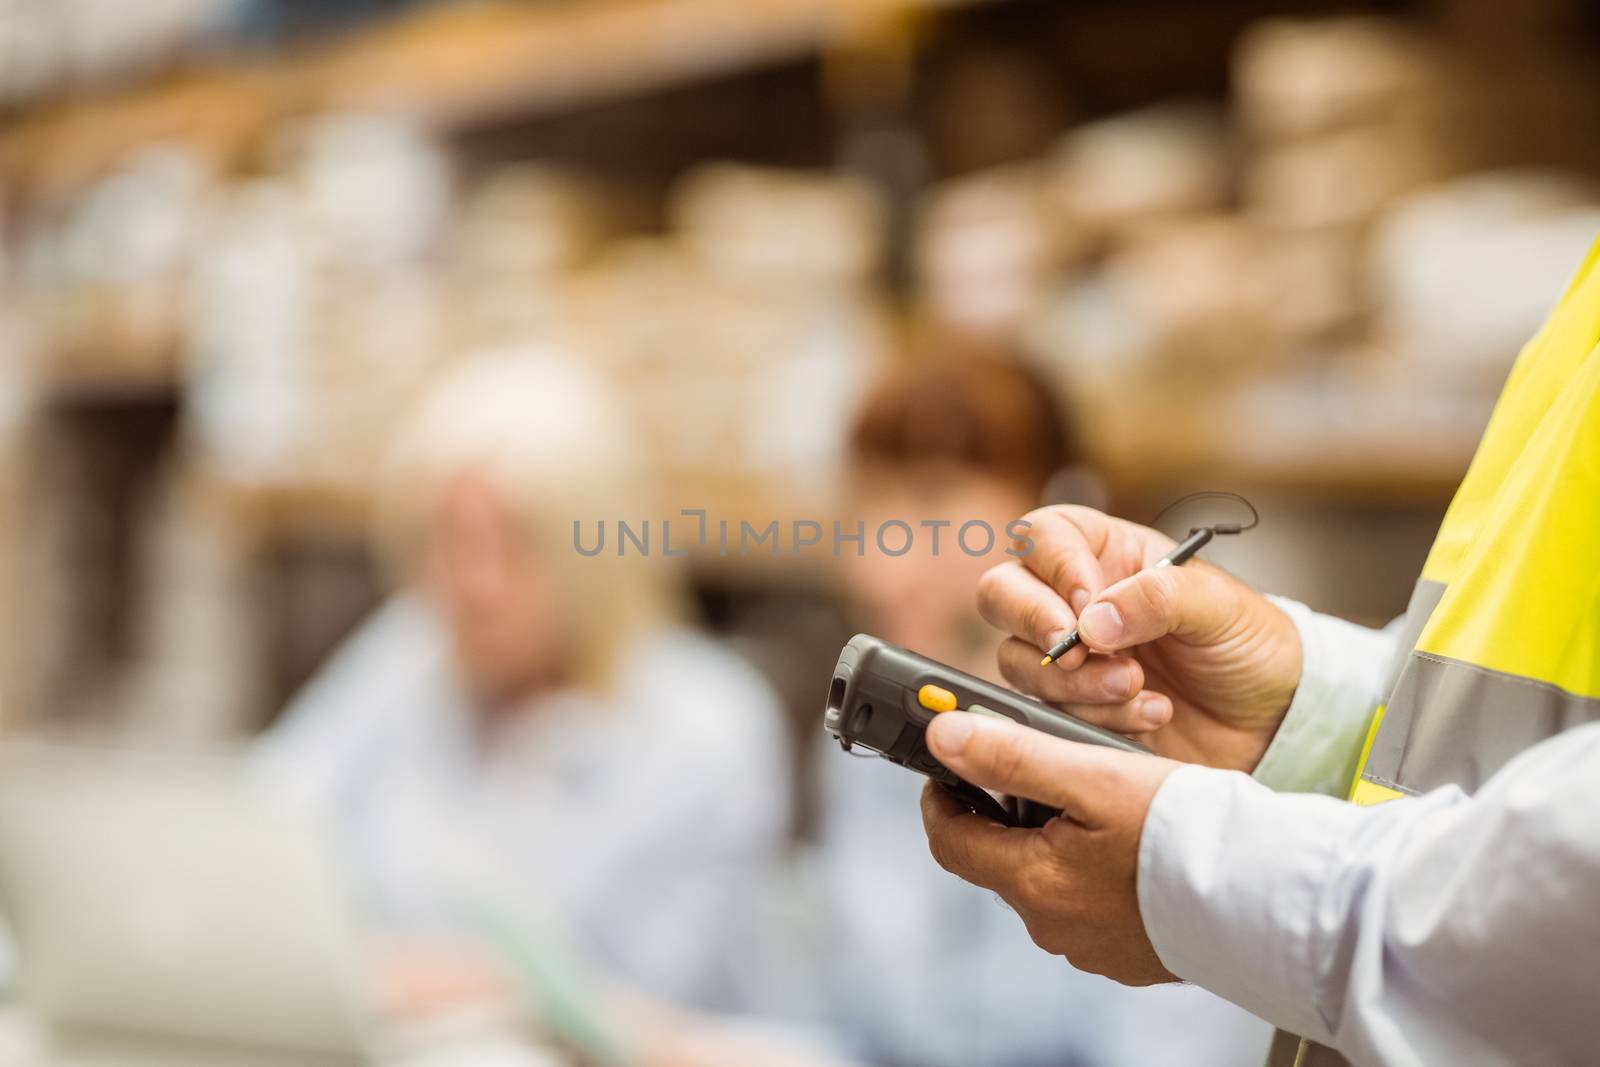 Close up of manager wearing yellow vest using handheld in a large warehouse